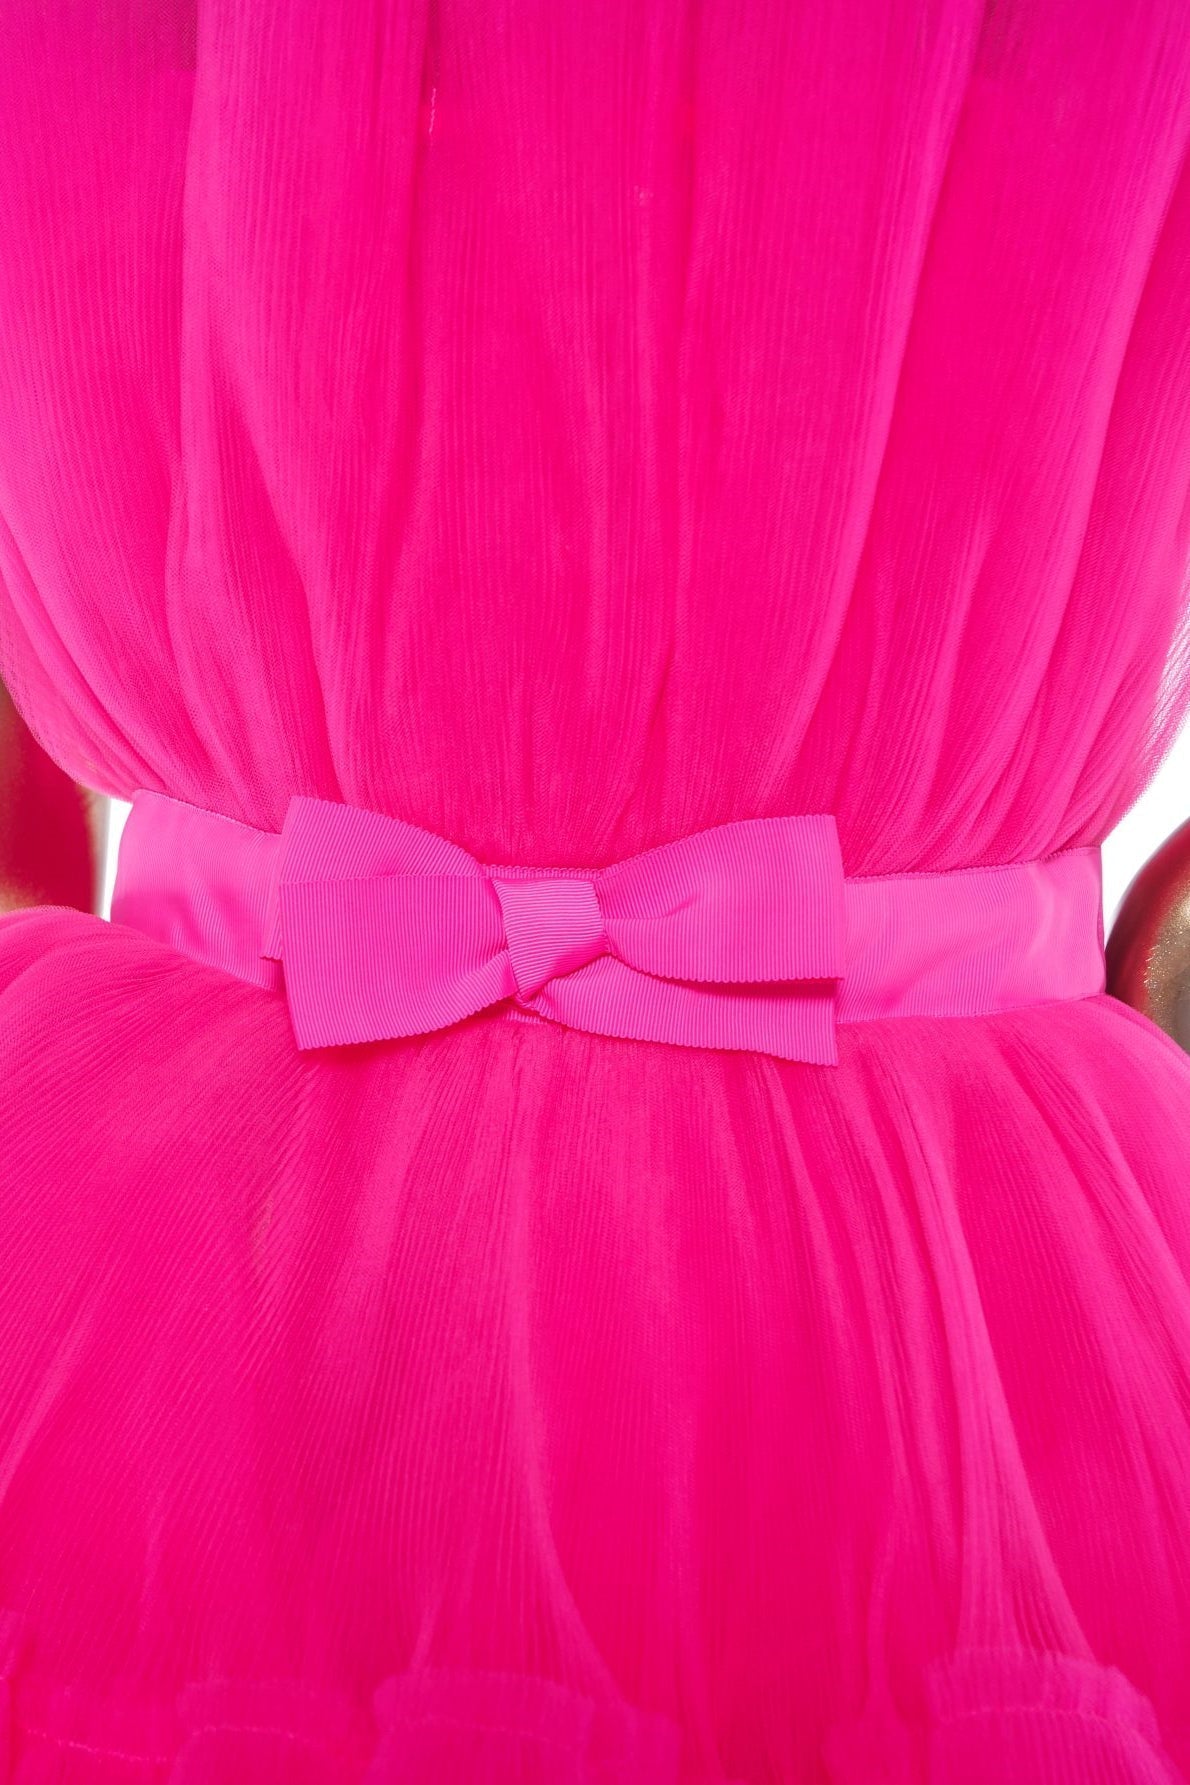 Party Dress Patterns, Hot Pink A-line Short Tulle Party Dress